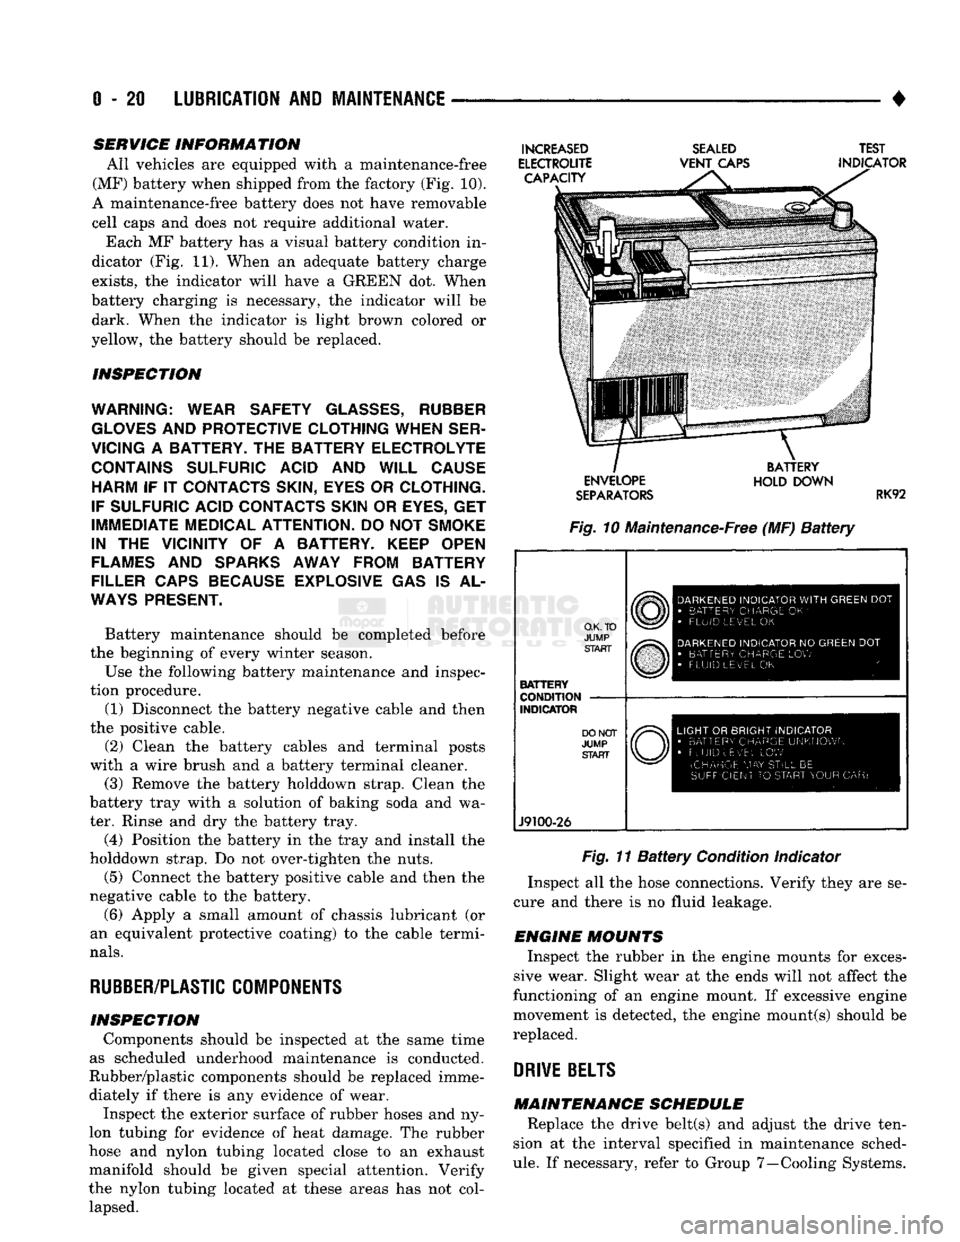 DODGE TRUCK 1993  Service Repair Manual 
0
 - 21
 LUBRICATION
 AND
 MAINTENANCE 

• SERVICE INFORMATION 
All vehicles are equipped with a maintenance-free 
(MF) battery when shipped from the factory (Fig. 10). 
A maintenance-free battery 